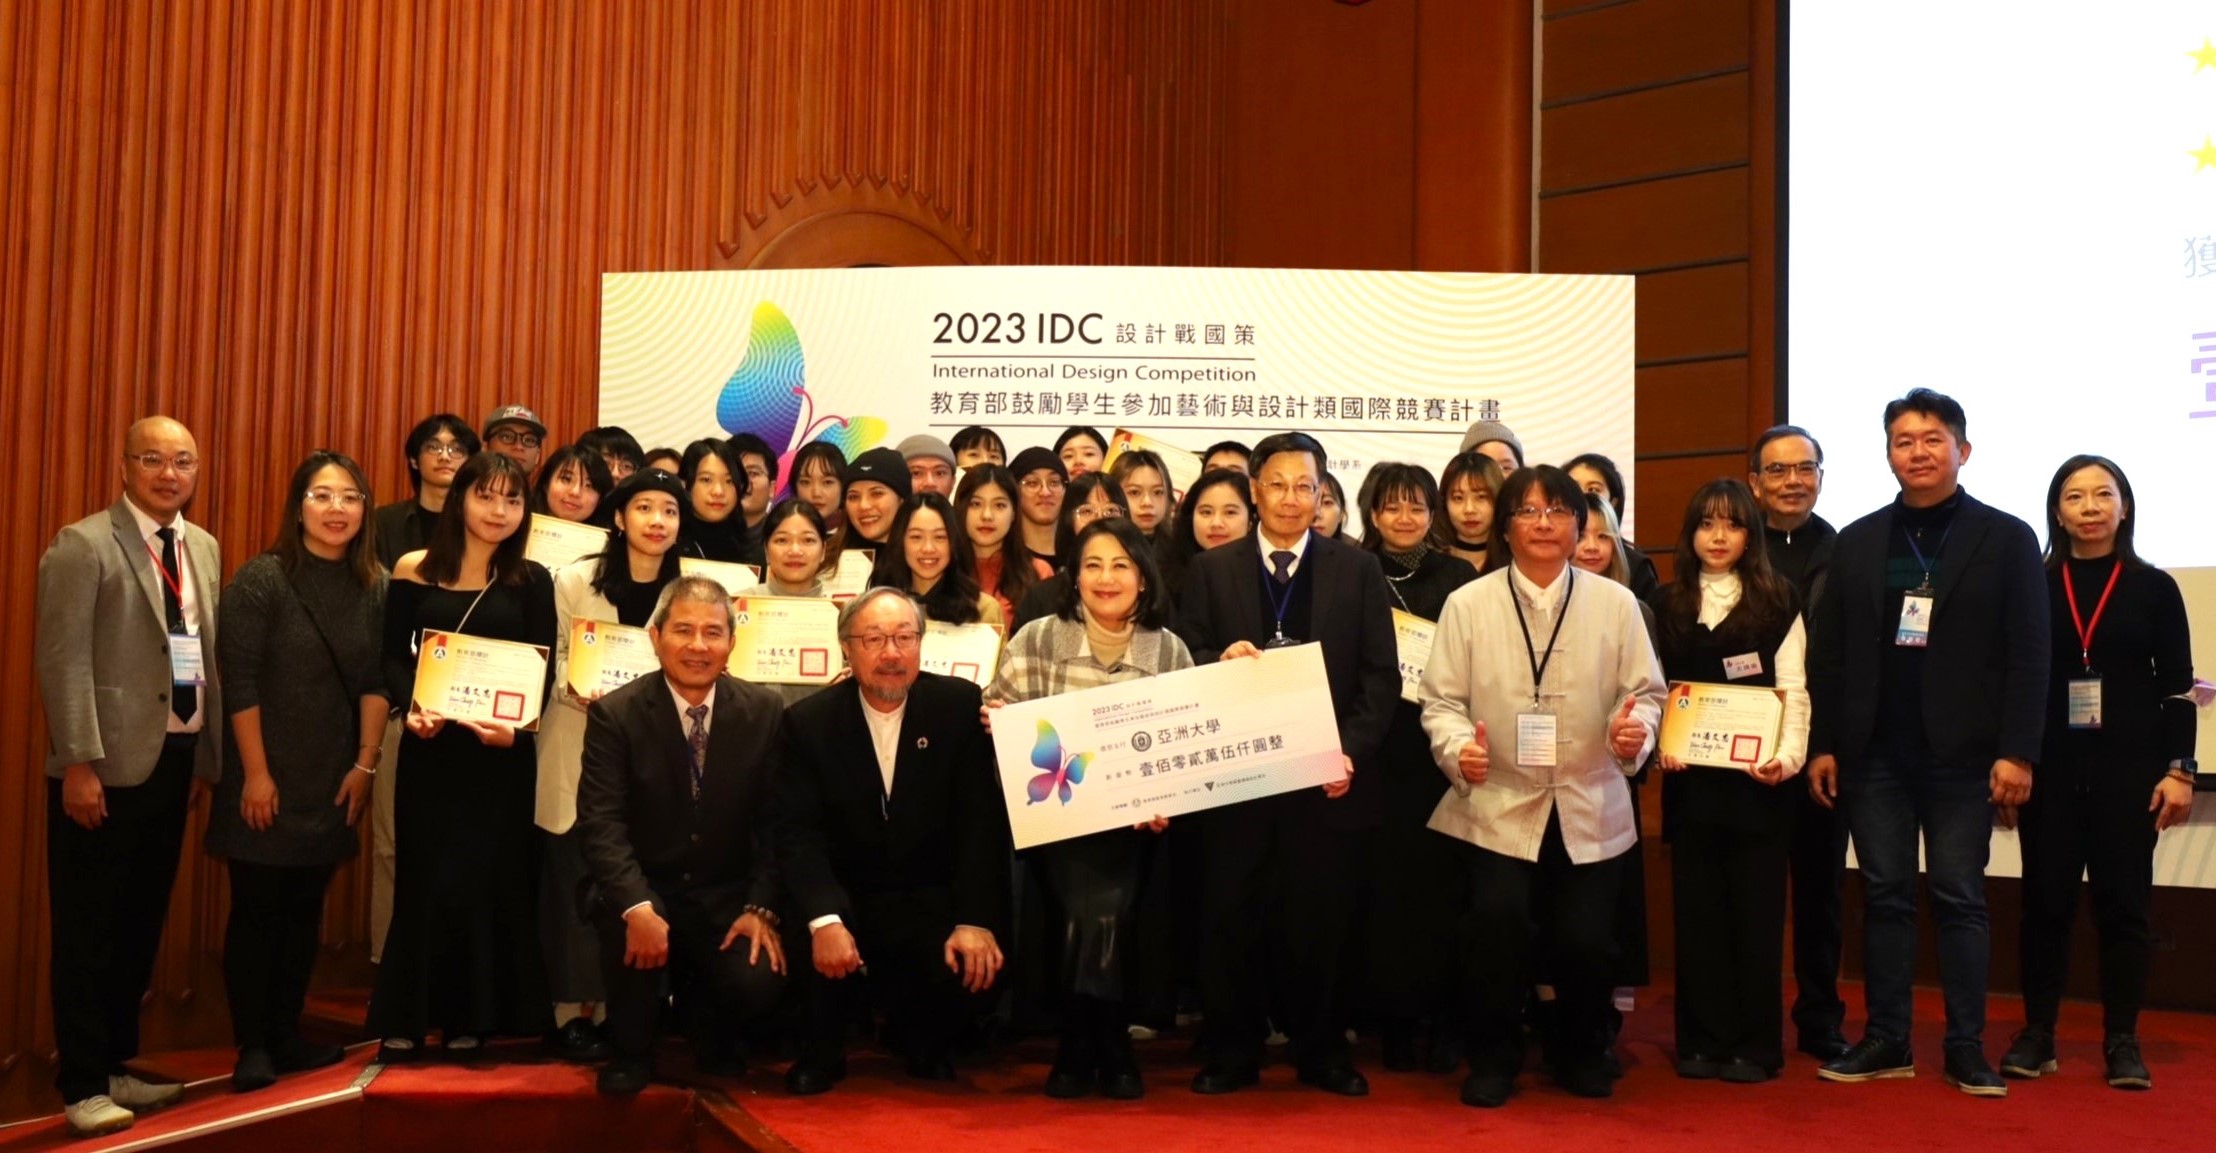 Asia University clinched the top spot nationwide in the Ministry of Education's ' Taiwan International Student Design Competition.' President Jeffrey J.P. Tsai of Asia University (second from the right in the front row) was joined by legislator Rosalia Wu from the Education and Culture Committee of the Legislative Yuan (third from the right in the front row), and Pang-Soong Lin, the initiator of the ' Award Incentive Program ' and a Chair Professor at Asia University (fourth from the right in the front row), for a group photo with the award-winning students and faculty